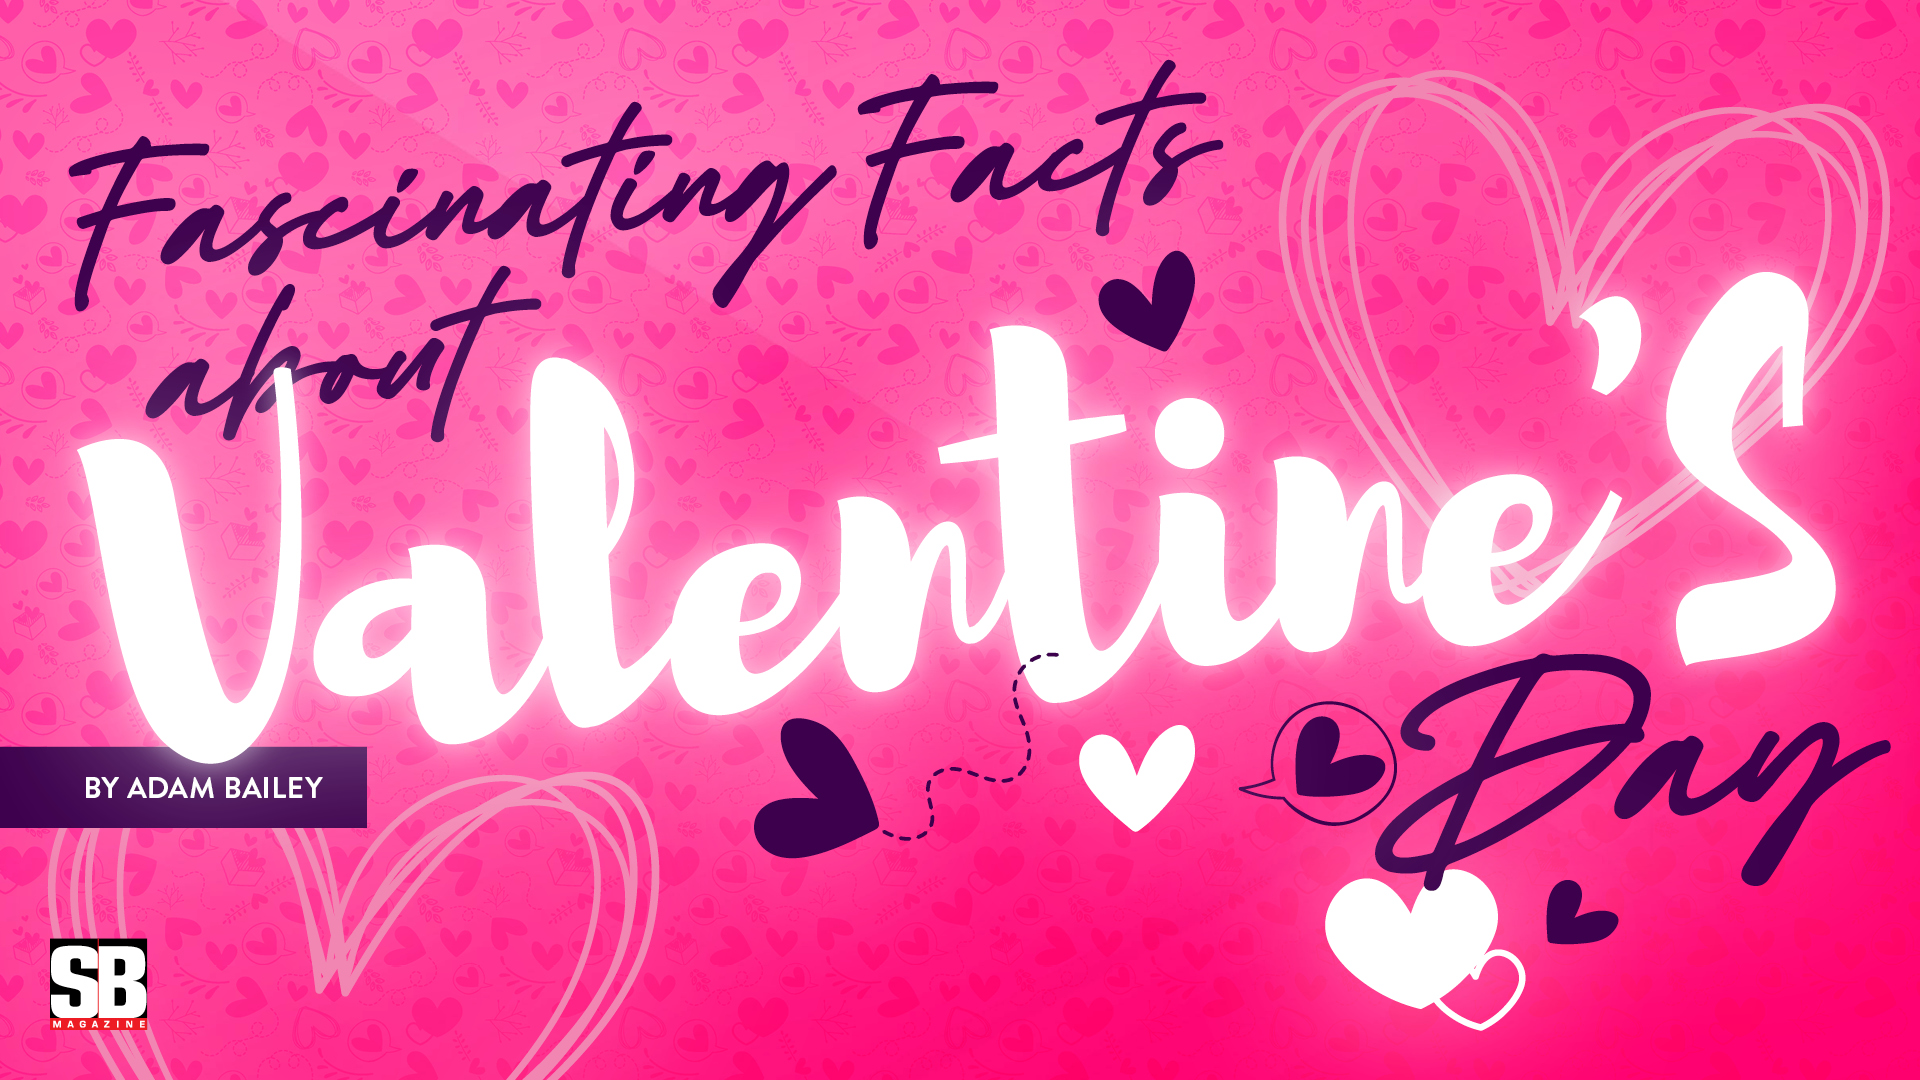 Fascinating Facts About Valentine's Day - SB Magazine